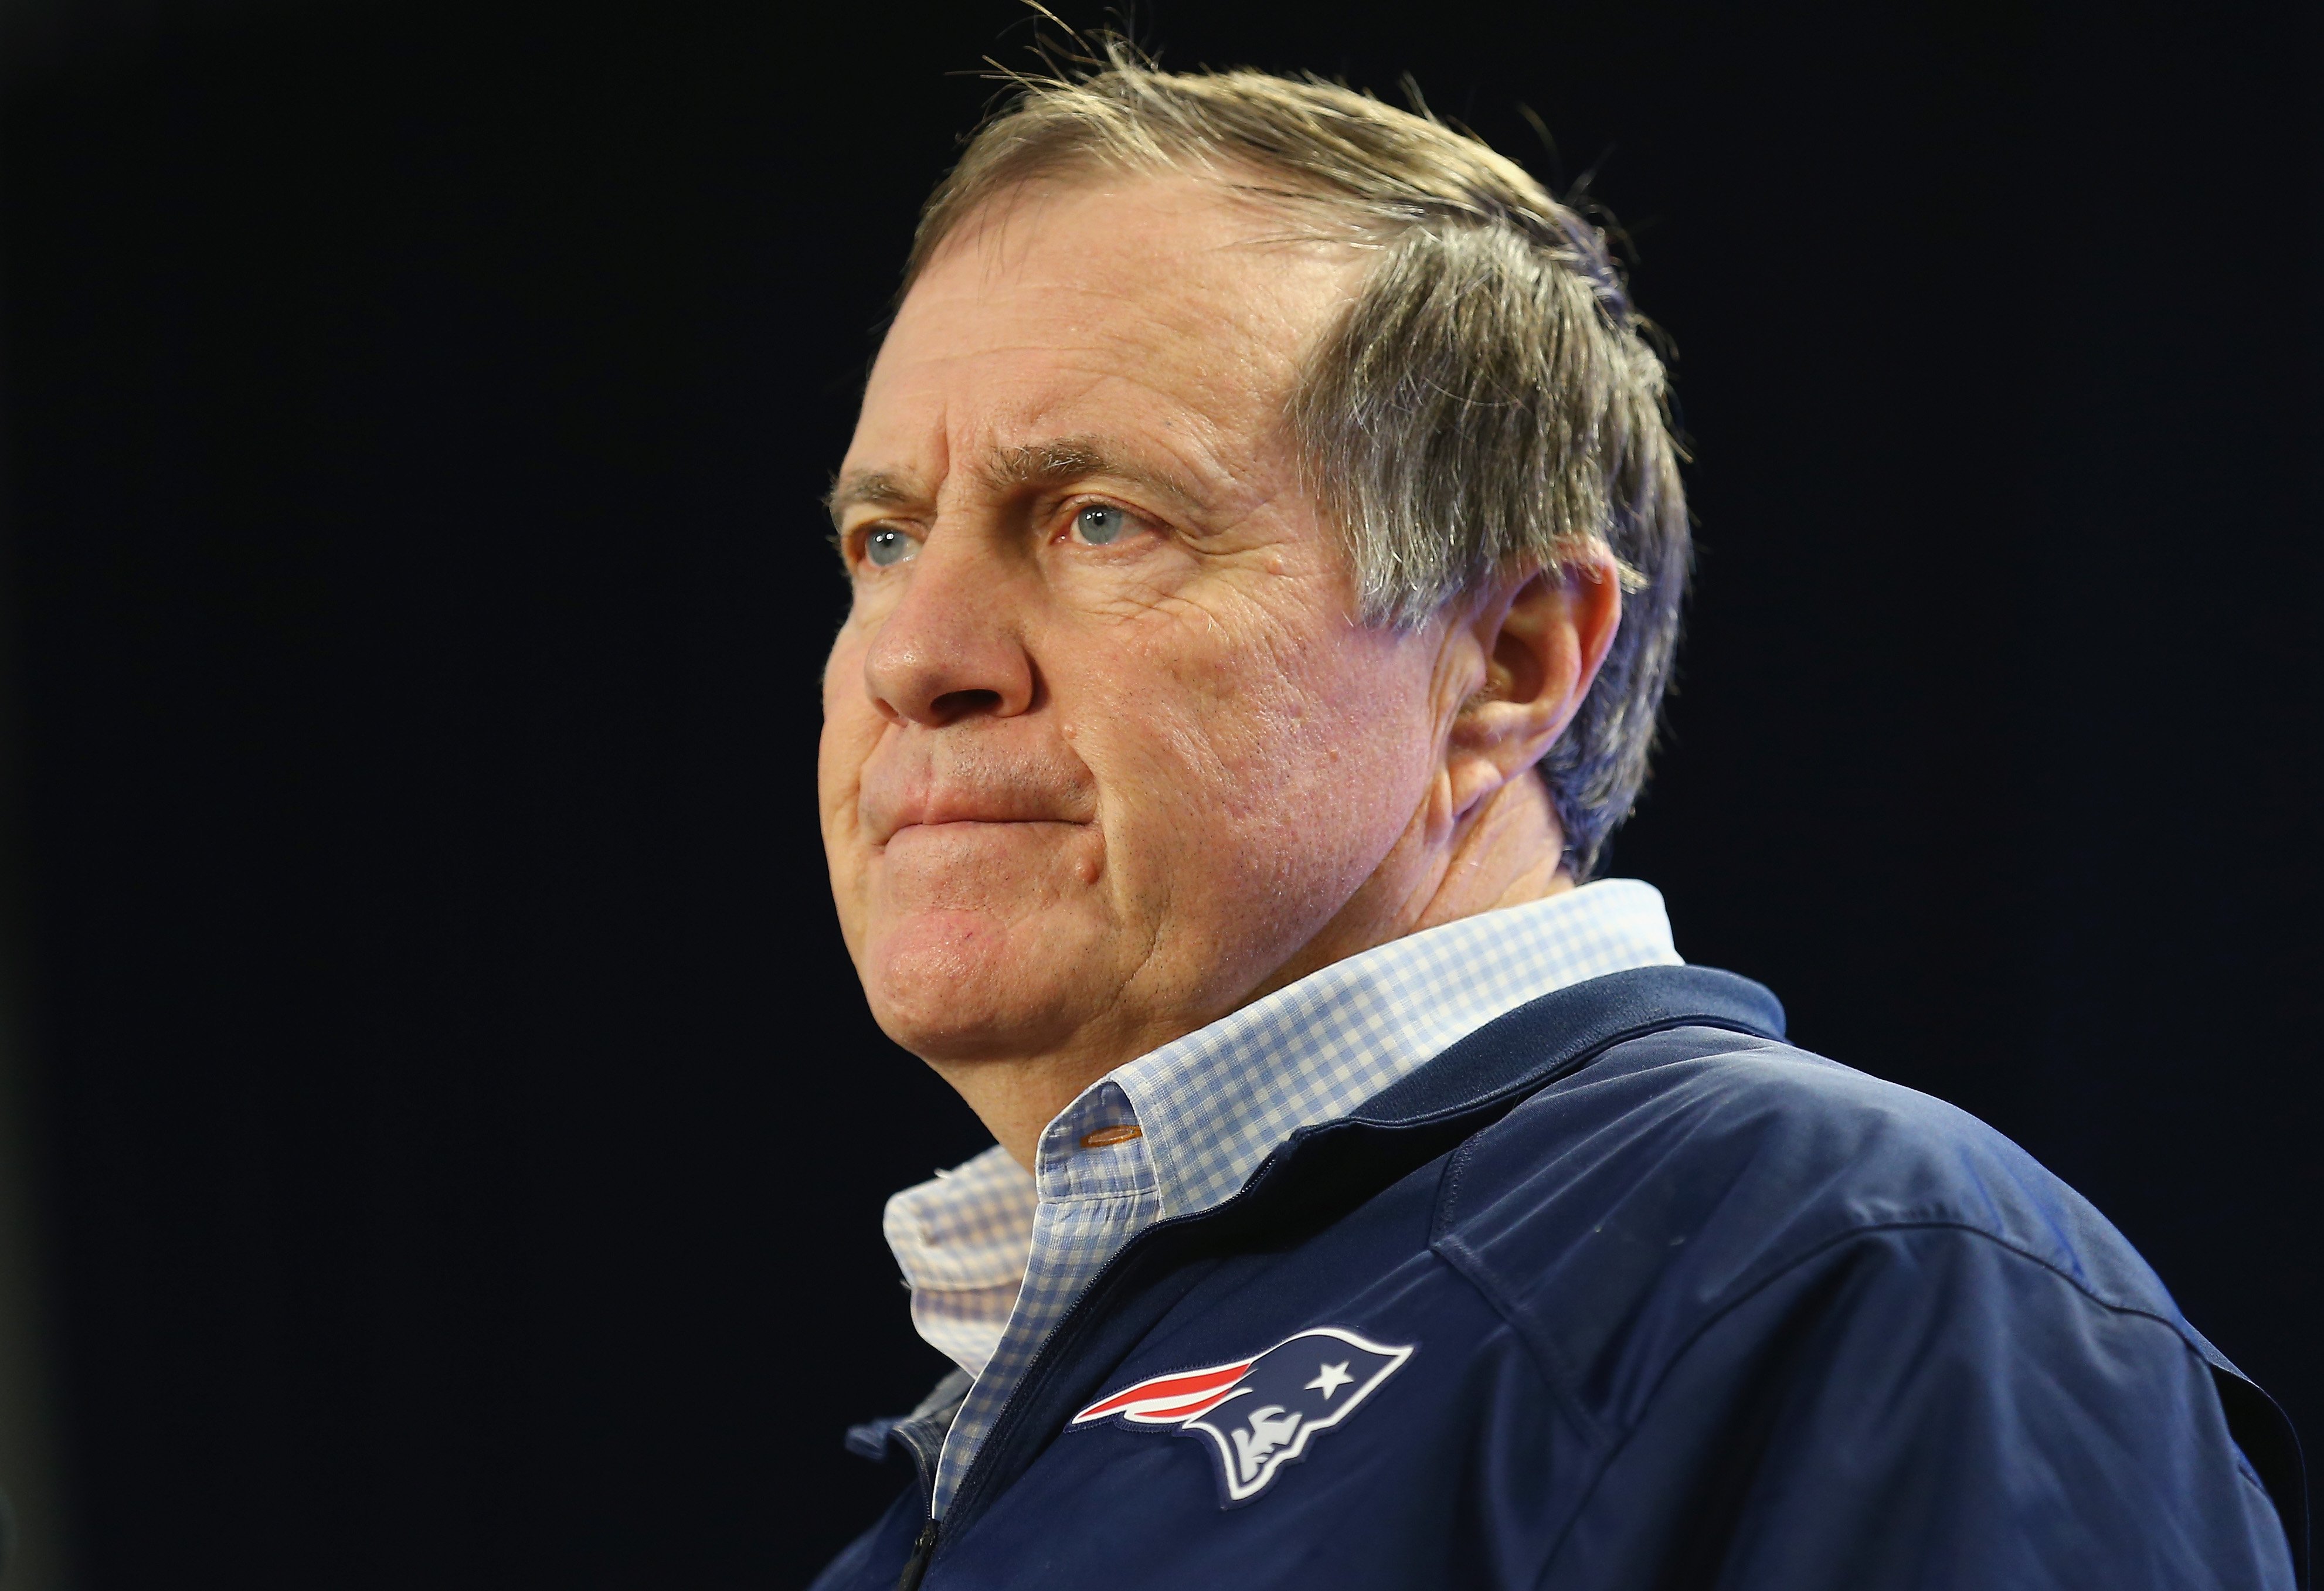 New England Patriots head coach Bill Belichick talks to the media during a press conference to address the under inflation of footballs used in the AFC championship game at Gillette Stadium on Jan. 22, 2015 in Foxboro, Mass. (Maddie Meyer—Getty Images)